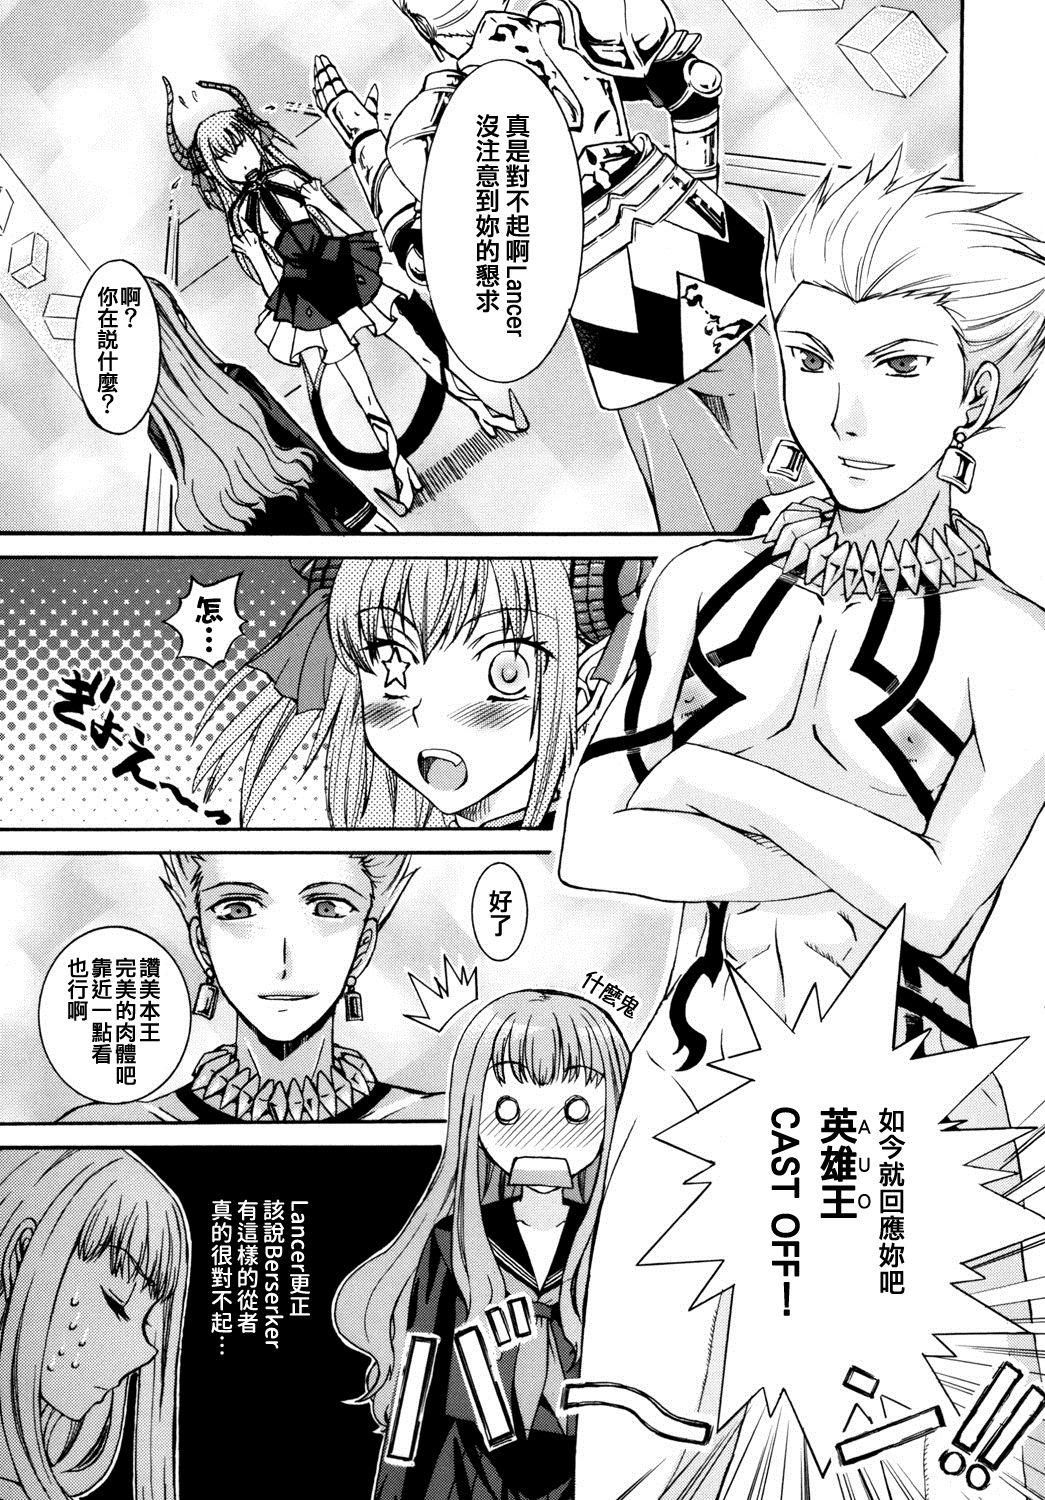 Hood Kore ga Watashi no Servant - This is my servant - Fate extra Exposed - Page 7